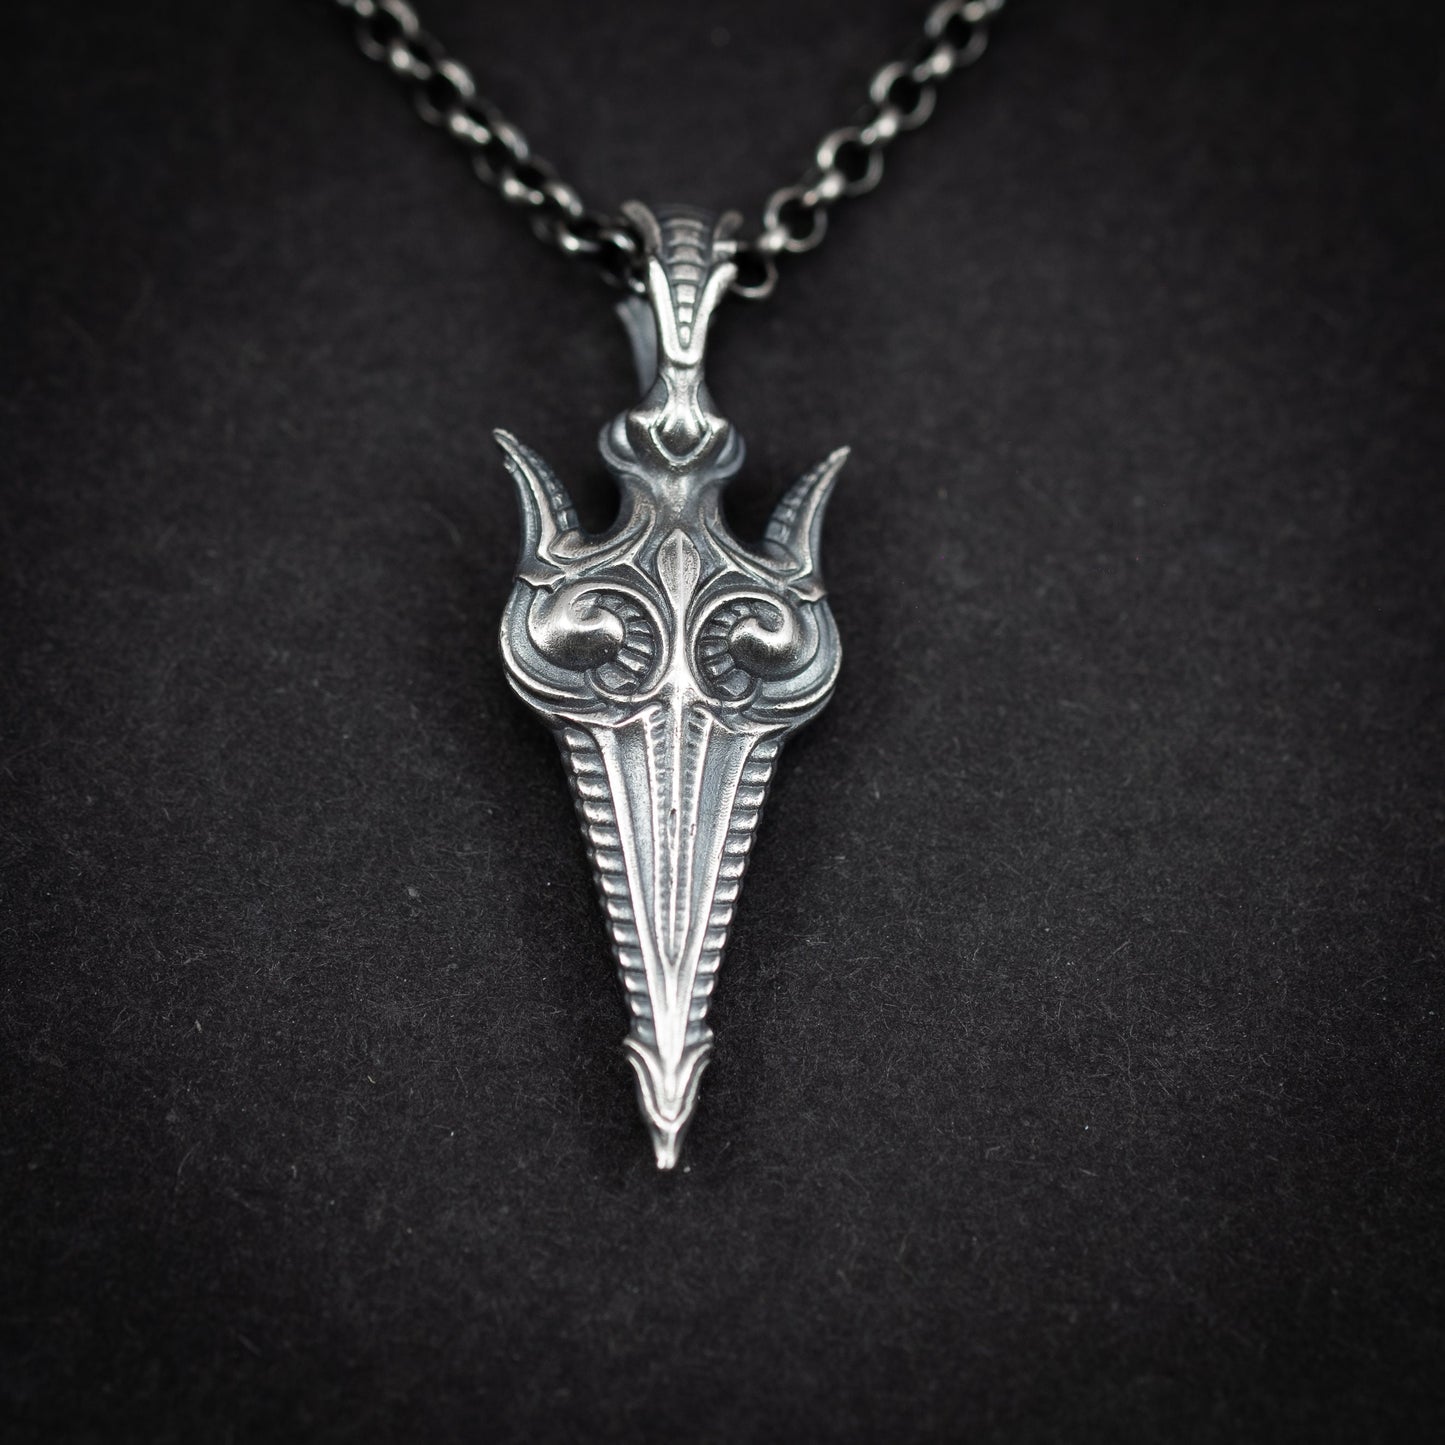 Gungnir spear Silver Viking Necklace, Warrior mens necklace, Norse Mythology, Strength pendant necklace, Handmade jewelry,